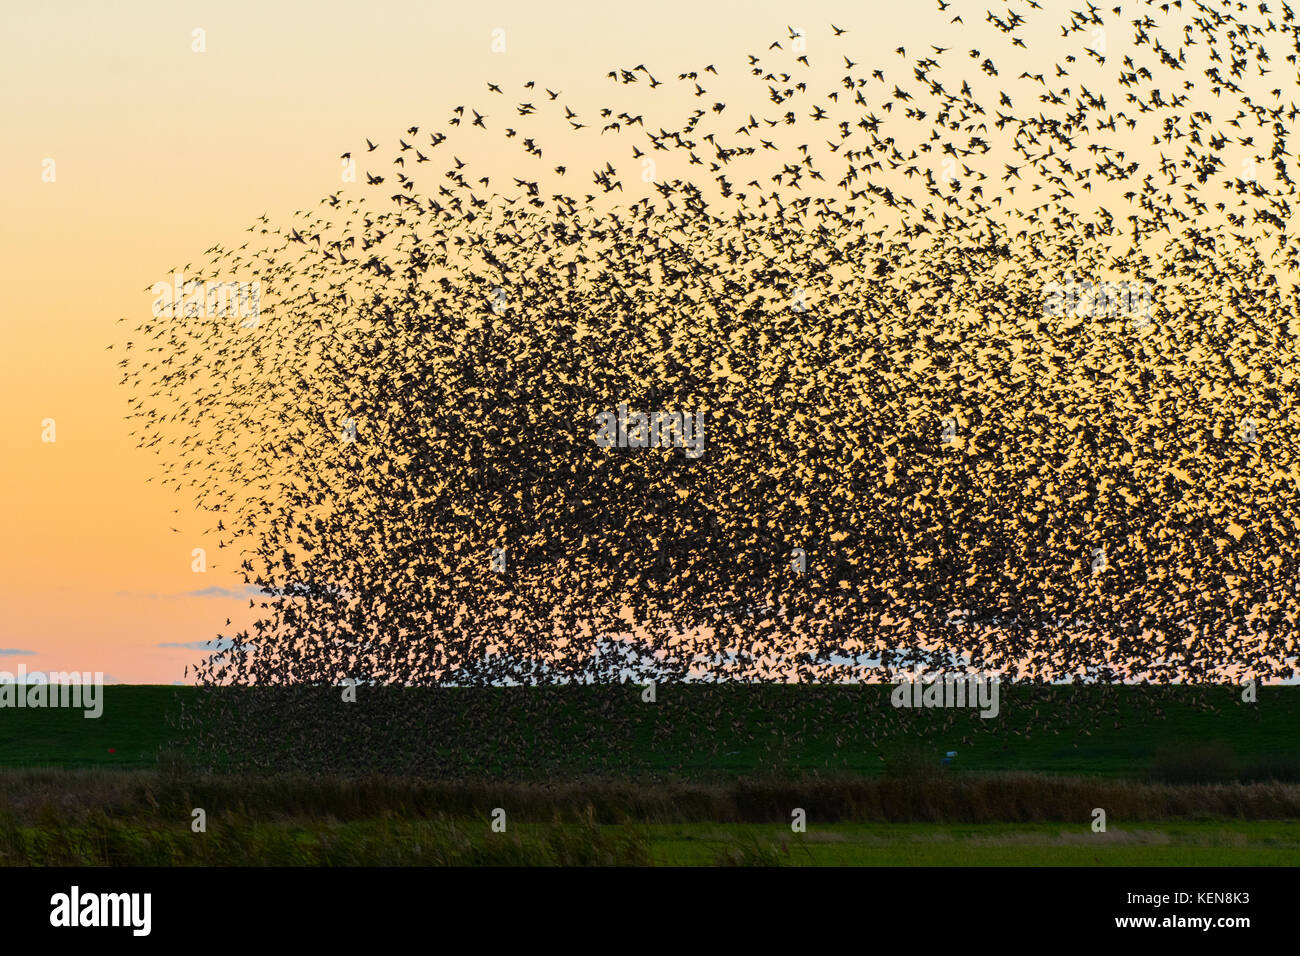 During The Autumn Migration From Northern Europe Thousands Of Starlings Comes Together In The Wetlands Between Denmark And Germany Stock Photo Alamy